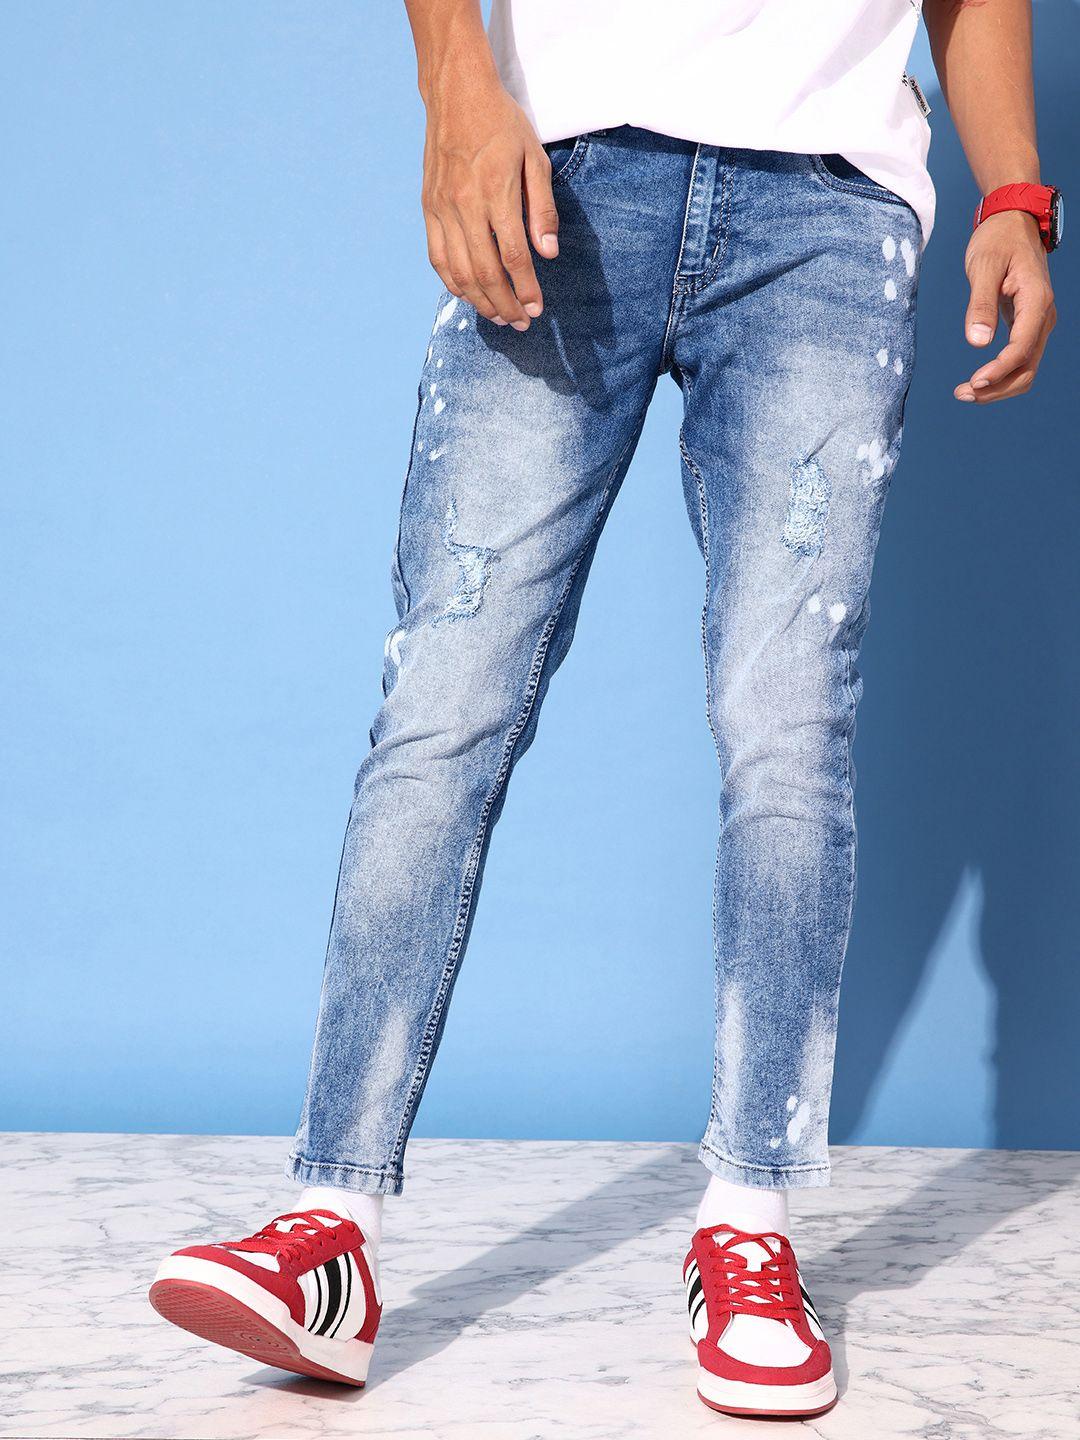 kook n keech men tapered fit ripped heavy fade bleached stretchable low and loose jeans